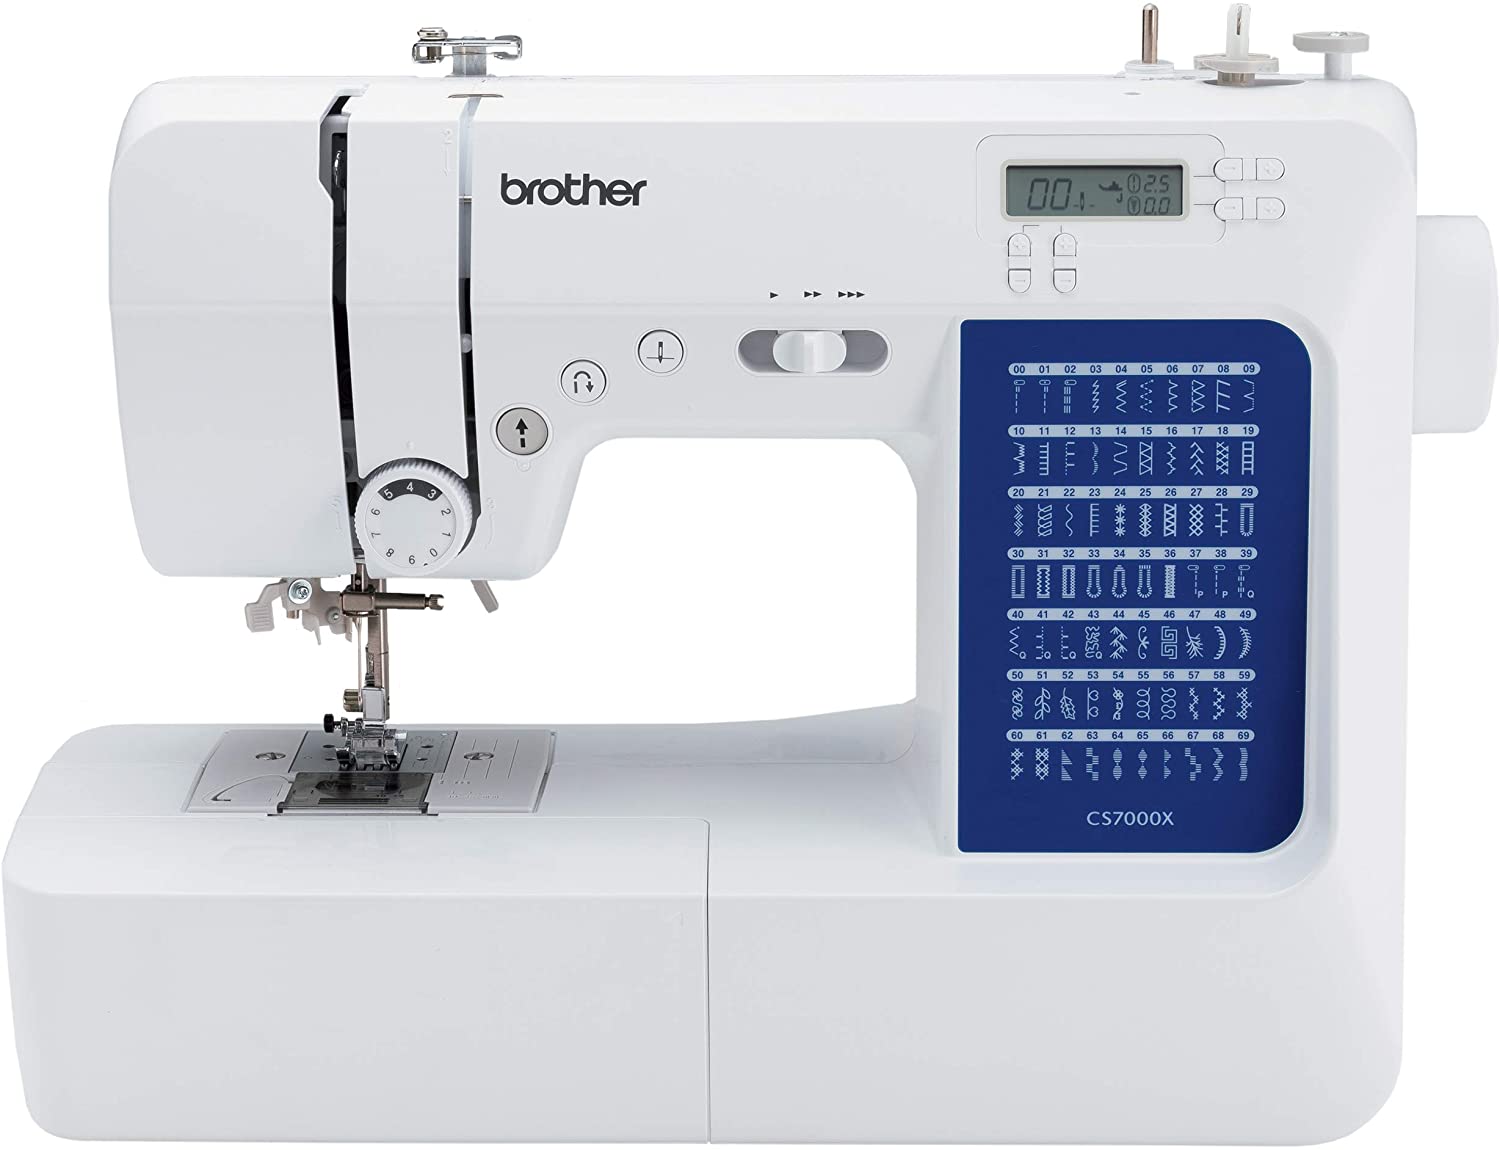 brother cs7000Xx computerized sewing and quilting machine